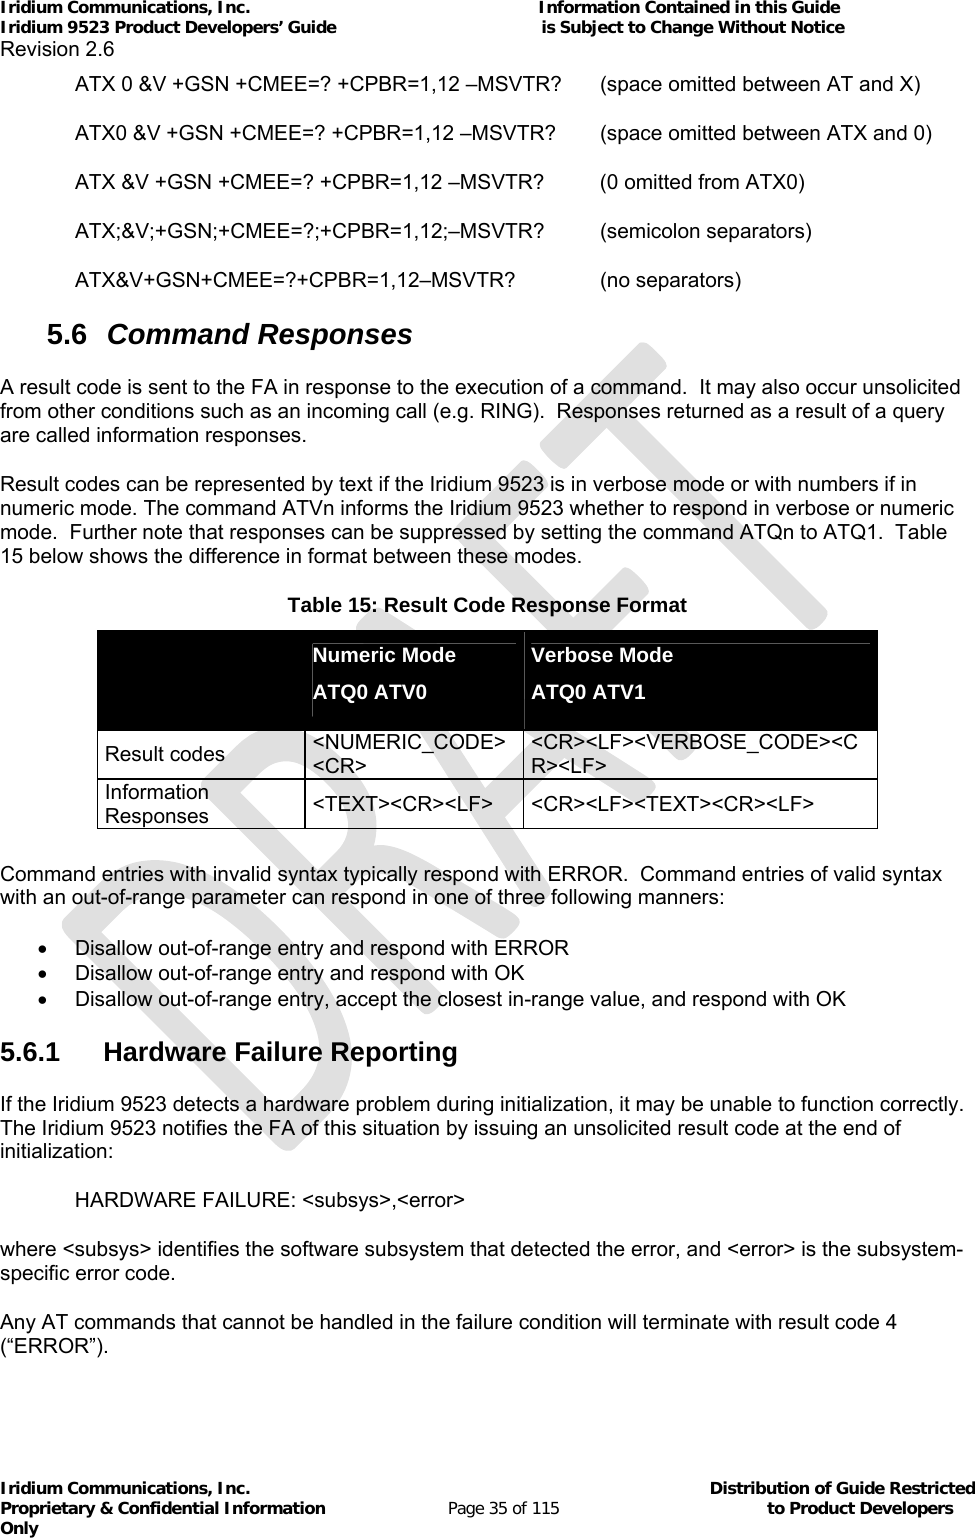 Iridium Communications, Inc.                                                           Information Contained in this Guide  Iridium 9523 Product Developers’ Guide                                          is Subject to Change Without Notice  Revision 2.6 Iridium Communications, Inc.                                          Distribution of Guide Restricted Proprietary &amp; Confidential Information                         Page 35 of 115                                        to Product Developers Only           ATX 0 &amp;V +GSN +CMEE=? +CPBR=1,12 –MSVTR?  (space omitted between AT and X) ATX0 &amp;V +GSN +CMEE=? +CPBR=1,12 –MSVTR?  (space omitted between ATX and 0) ATX &amp;V +GSN +CMEE=? +CPBR=1,12 –MSVTR?  (0 omitted from ATX0) ATX;&amp;V;+GSN;+CMEE=?;+CPBR=1,12;–MSVTR? (semicolon separators) ATX&amp;V+GSN+CMEE=?+CPBR=1,12–MSVTR?   (no separators) 5.6  Command Responses A result code is sent to the FA in response to the execution of a command.  It may also occur unsolicited from other conditions such as an incoming call (e.g. RING).  Responses returned as a result of a query are called information responses. Result codes can be represented by text if the Iridium 9523 is in verbose mode or with numbers if in numeric mode. The command ATVn informs the Iridium 9523 whether to respond in verbose or numeric mode.  Further note that responses can be suppressed by setting the command ATQn to ATQ1.  Table 15 below shows the difference in format between these modes.   Table 15: Result Code Response Format   Numeric Mode ATQ0 ATV0 Verbose Mode ATQ0 ATV1 Result codes  &lt;NUMERIC_CODE&gt;&lt;CR&gt; &lt;CR&gt;&lt;LF&gt;&lt;VERBOSE_CODE&gt;&lt;CR&gt;&lt;LF&gt; Information Responses  &lt;TEXT&gt;&lt;CR&gt;&lt;LF&gt; &lt;CR&gt;&lt;LF&gt;&lt;TEXT&gt;&lt;CR&gt;&lt;LF&gt;  Command entries with invalid syntax typically respond with ERROR.  Command entries of valid syntax with an out-of-range parameter can respond in one of three following manners:   Disallow out-of-range entry and respond with ERROR   Disallow out-of-range entry and respond with OK   Disallow out-of-range entry, accept the closest in-range value, and respond with OK 5.6.1 Hardware Failure Reporting If the Iridium 9523 detects a hardware problem during initialization, it may be unable to function correctly.  The Iridium 9523 notifies the FA of this situation by issuing an unsolicited result code at the end of initialization: HARDWARE FAILURE: &lt;subsys&gt;,&lt;error&gt; where &lt;subsys&gt; identifies the software subsystem that detected the error, and &lt;error&gt; is the subsystem-specific error code. Any AT commands that cannot be handled in the failure condition will terminate with result code 4 (“ERROR”). 